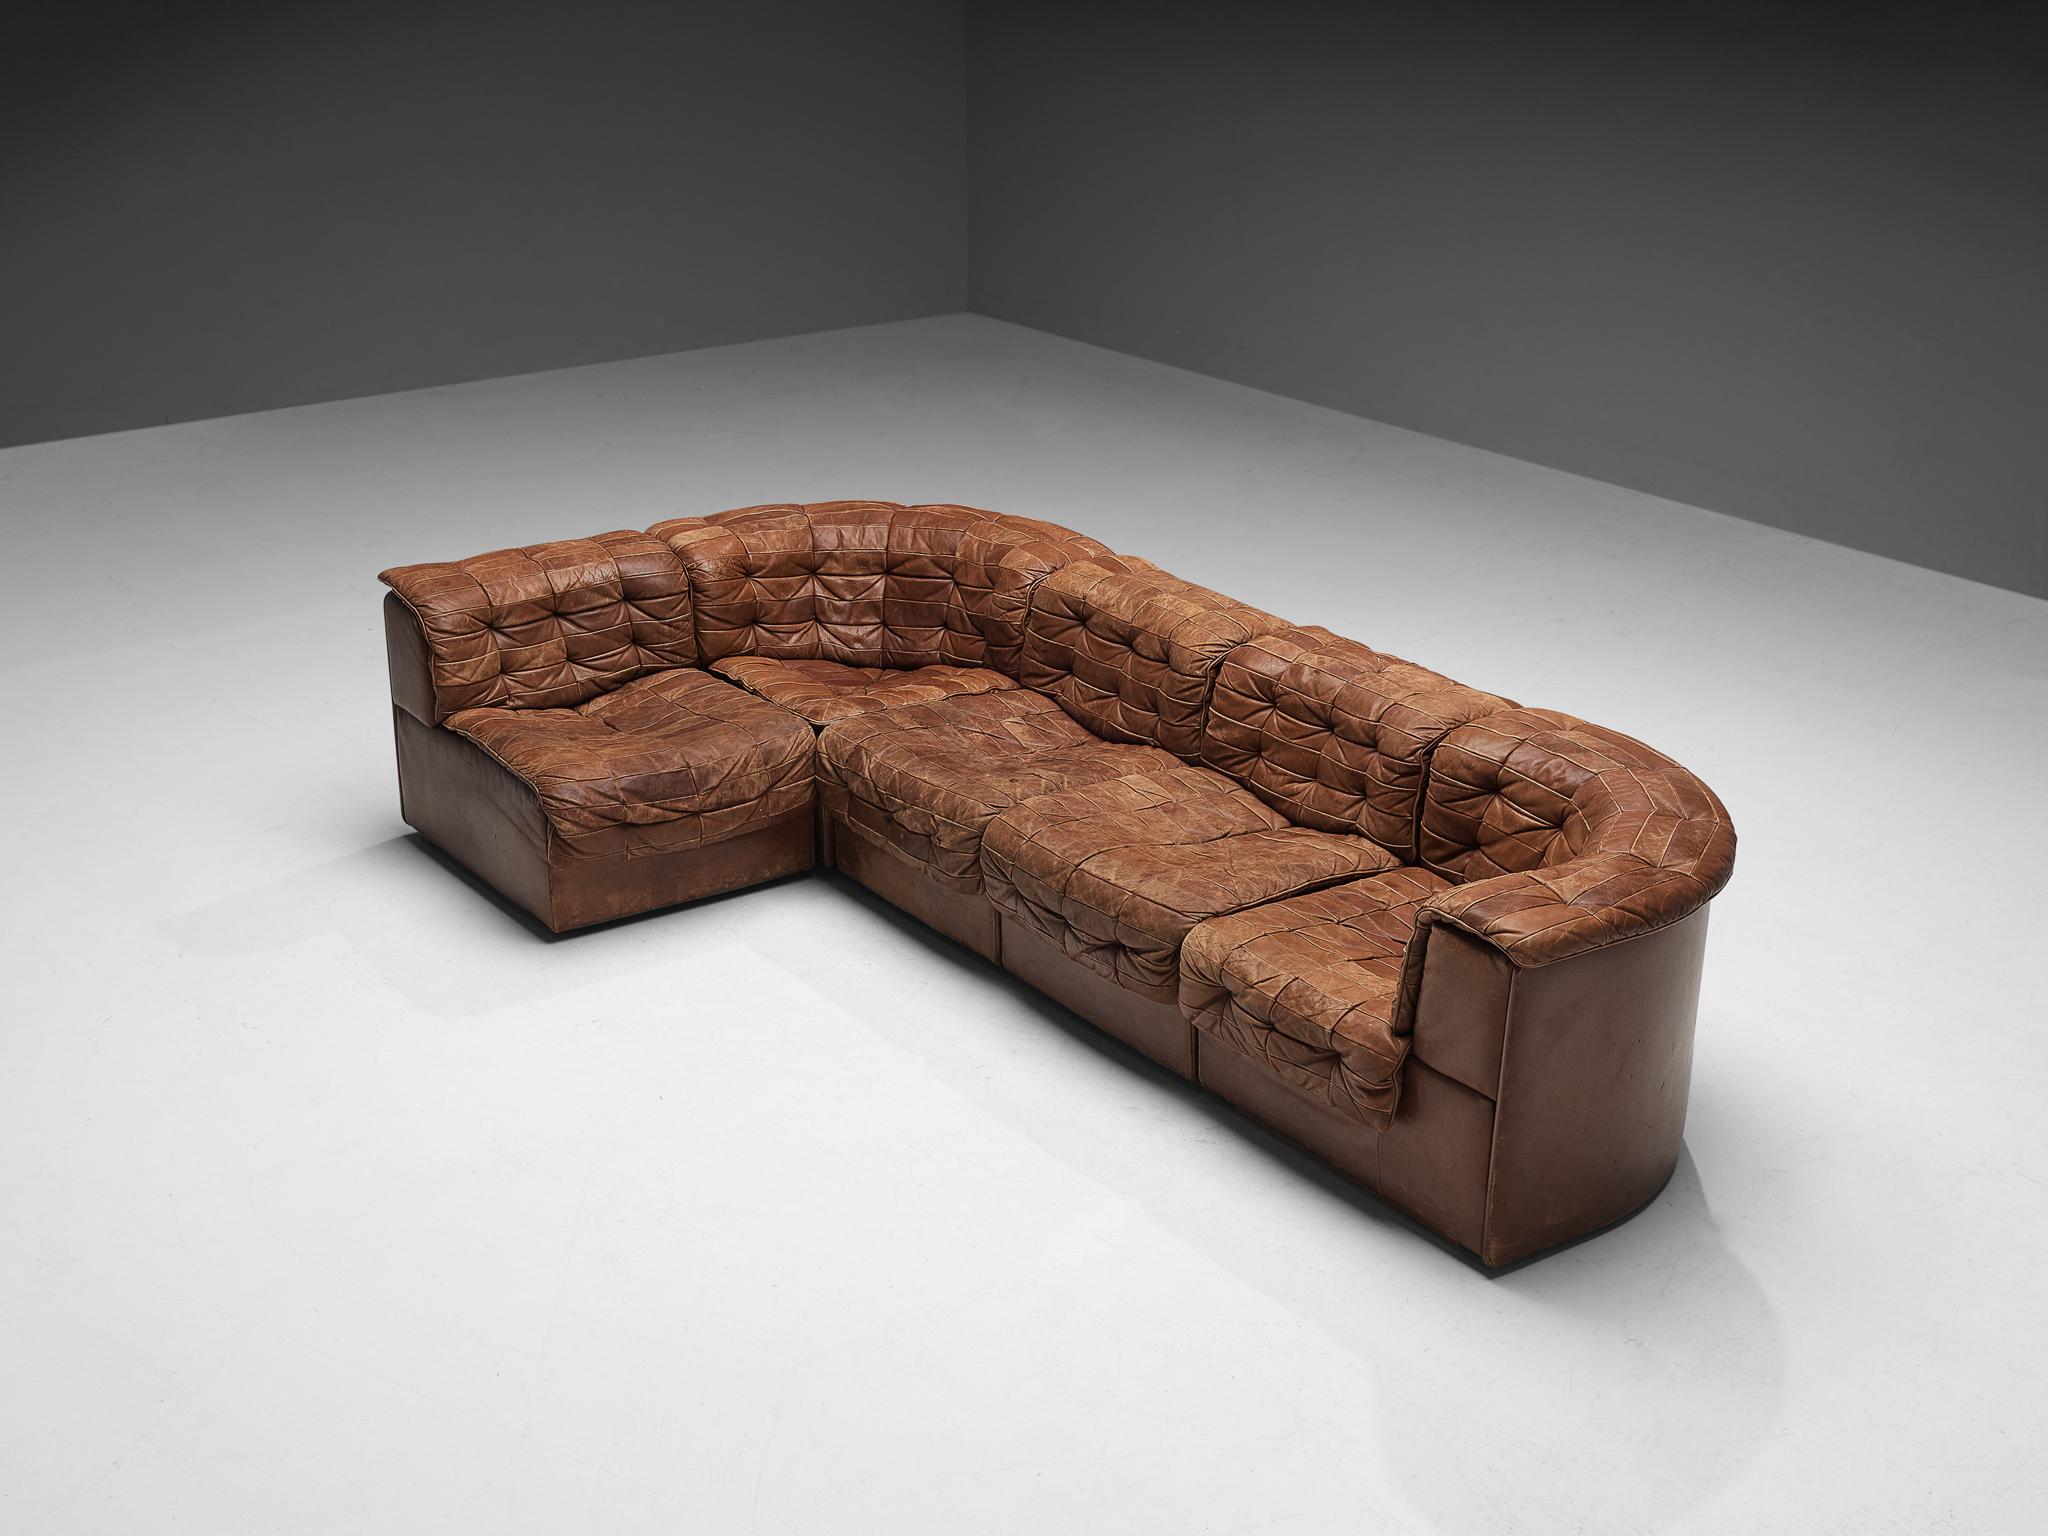 De Sede, 'DS-11' sectional sofa, leather, Switzerland, 1970s.

This high-quality sectional sofa designed by De Sede in the 1970s contains three regular elements, two corner elements, making it possible to arrange this sofa to your own wishes. This